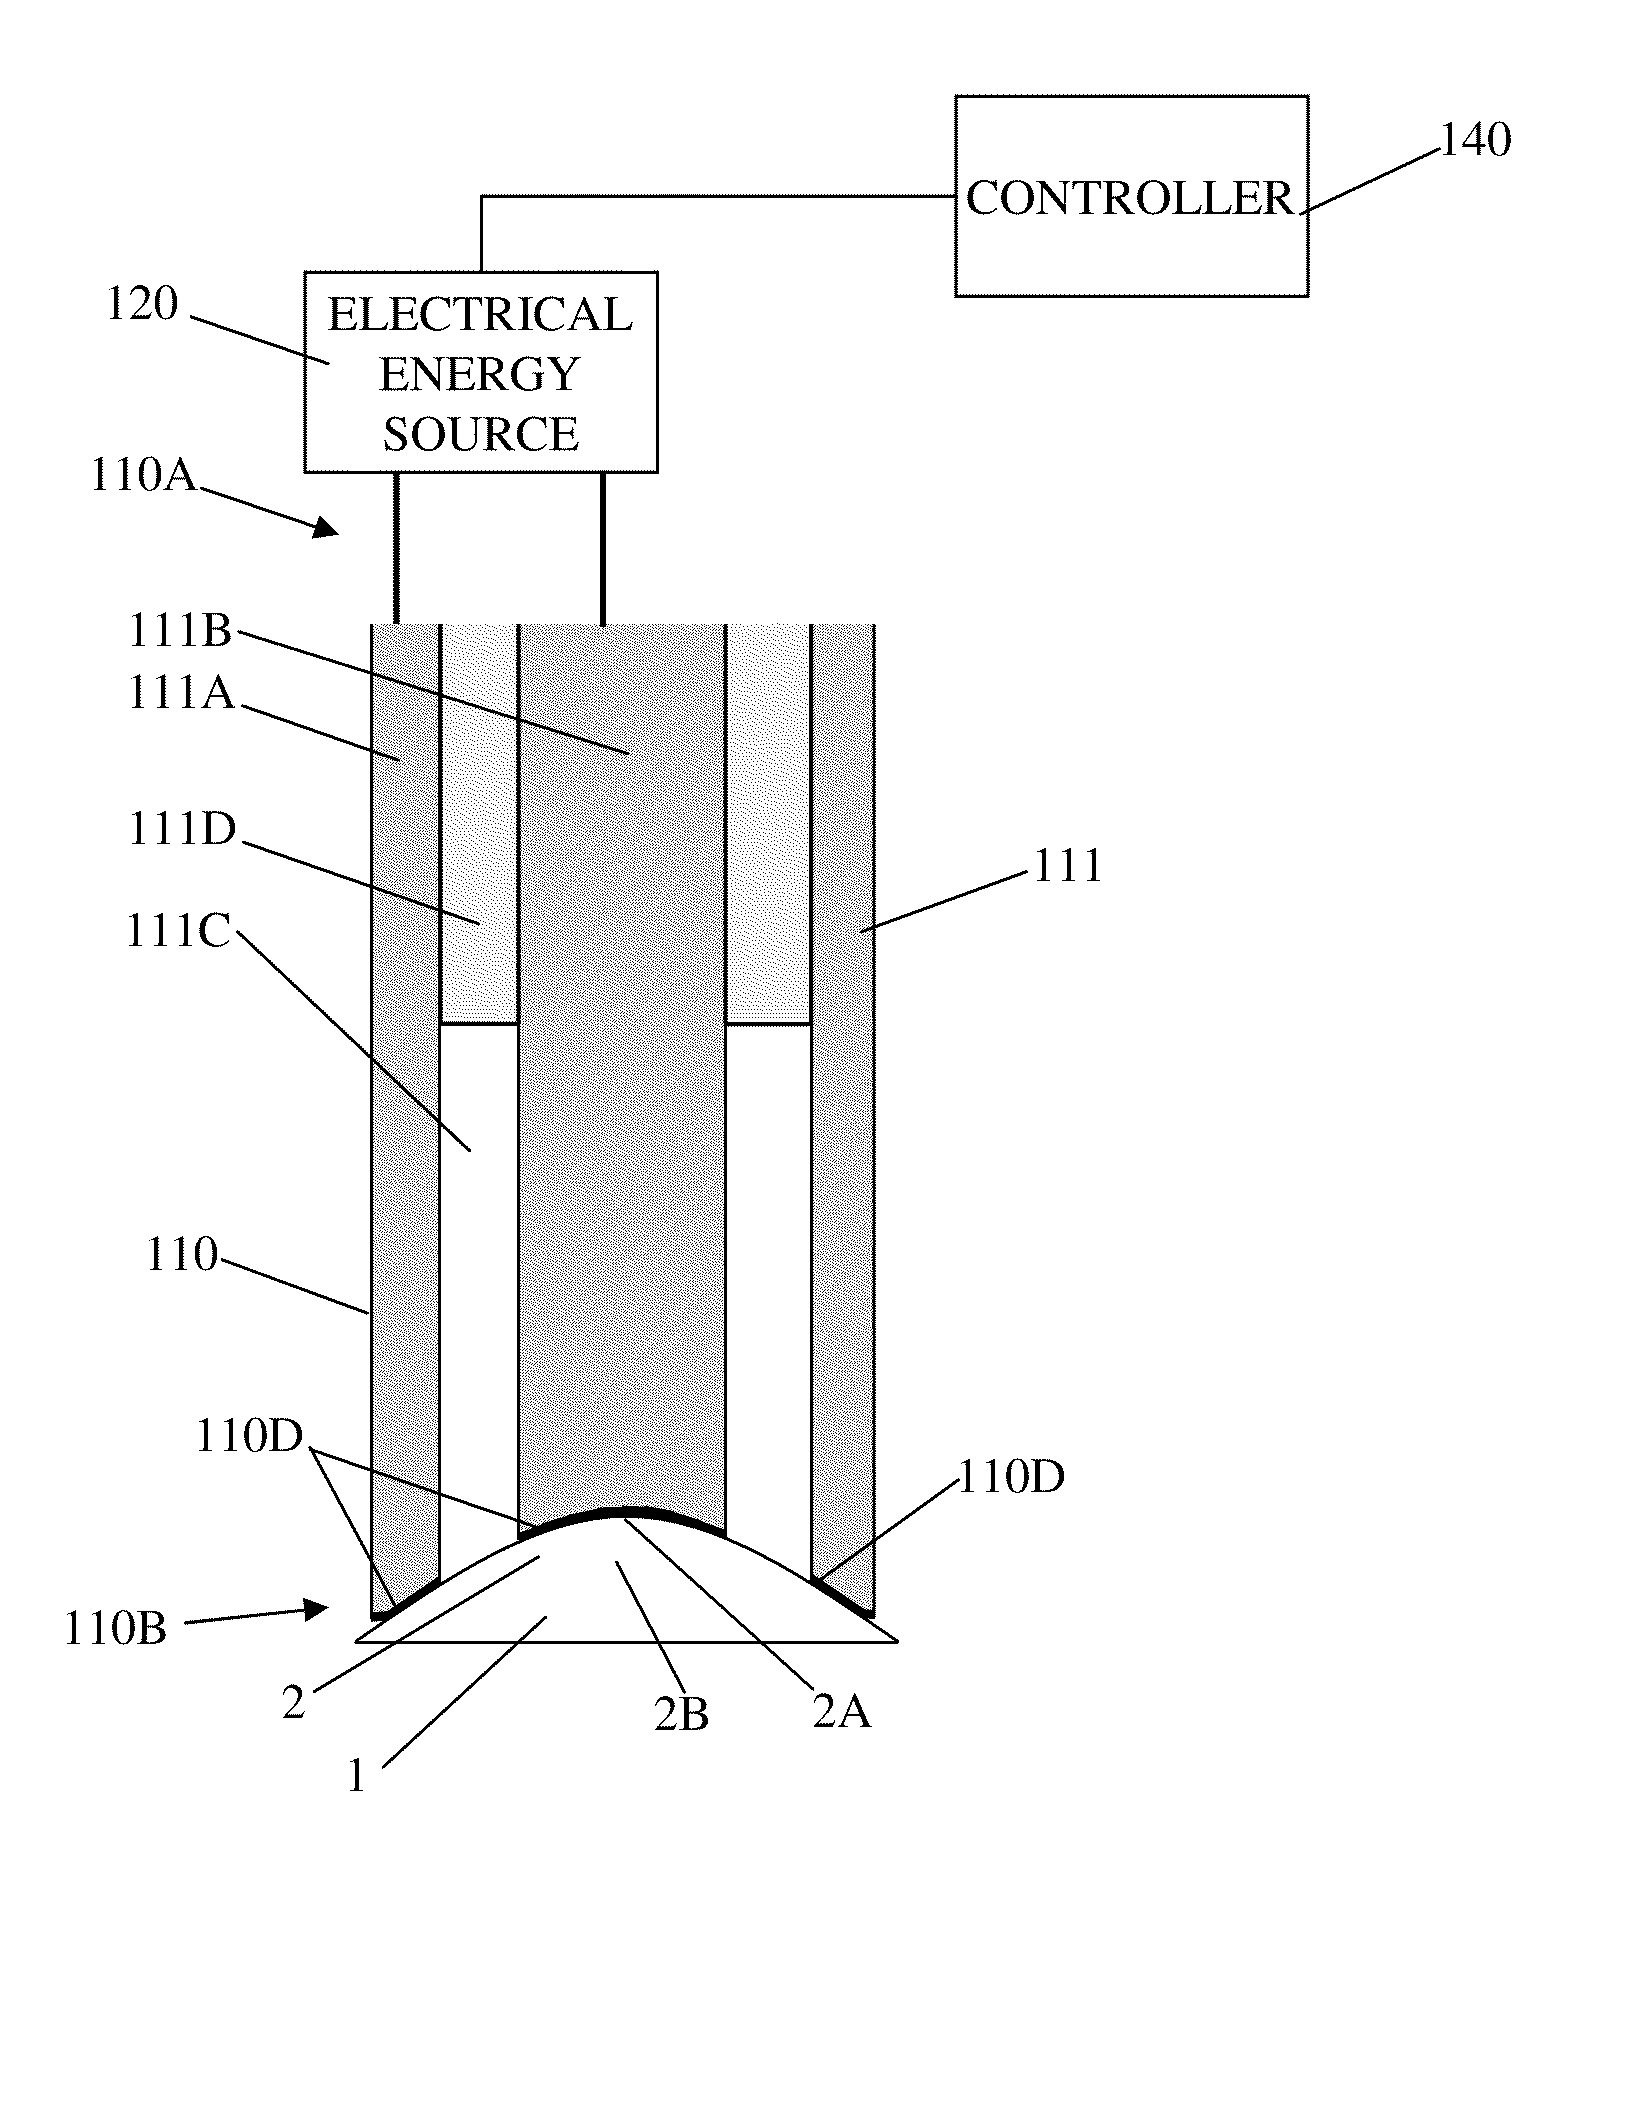 System and method for stabilizing corneal tissue after treatment